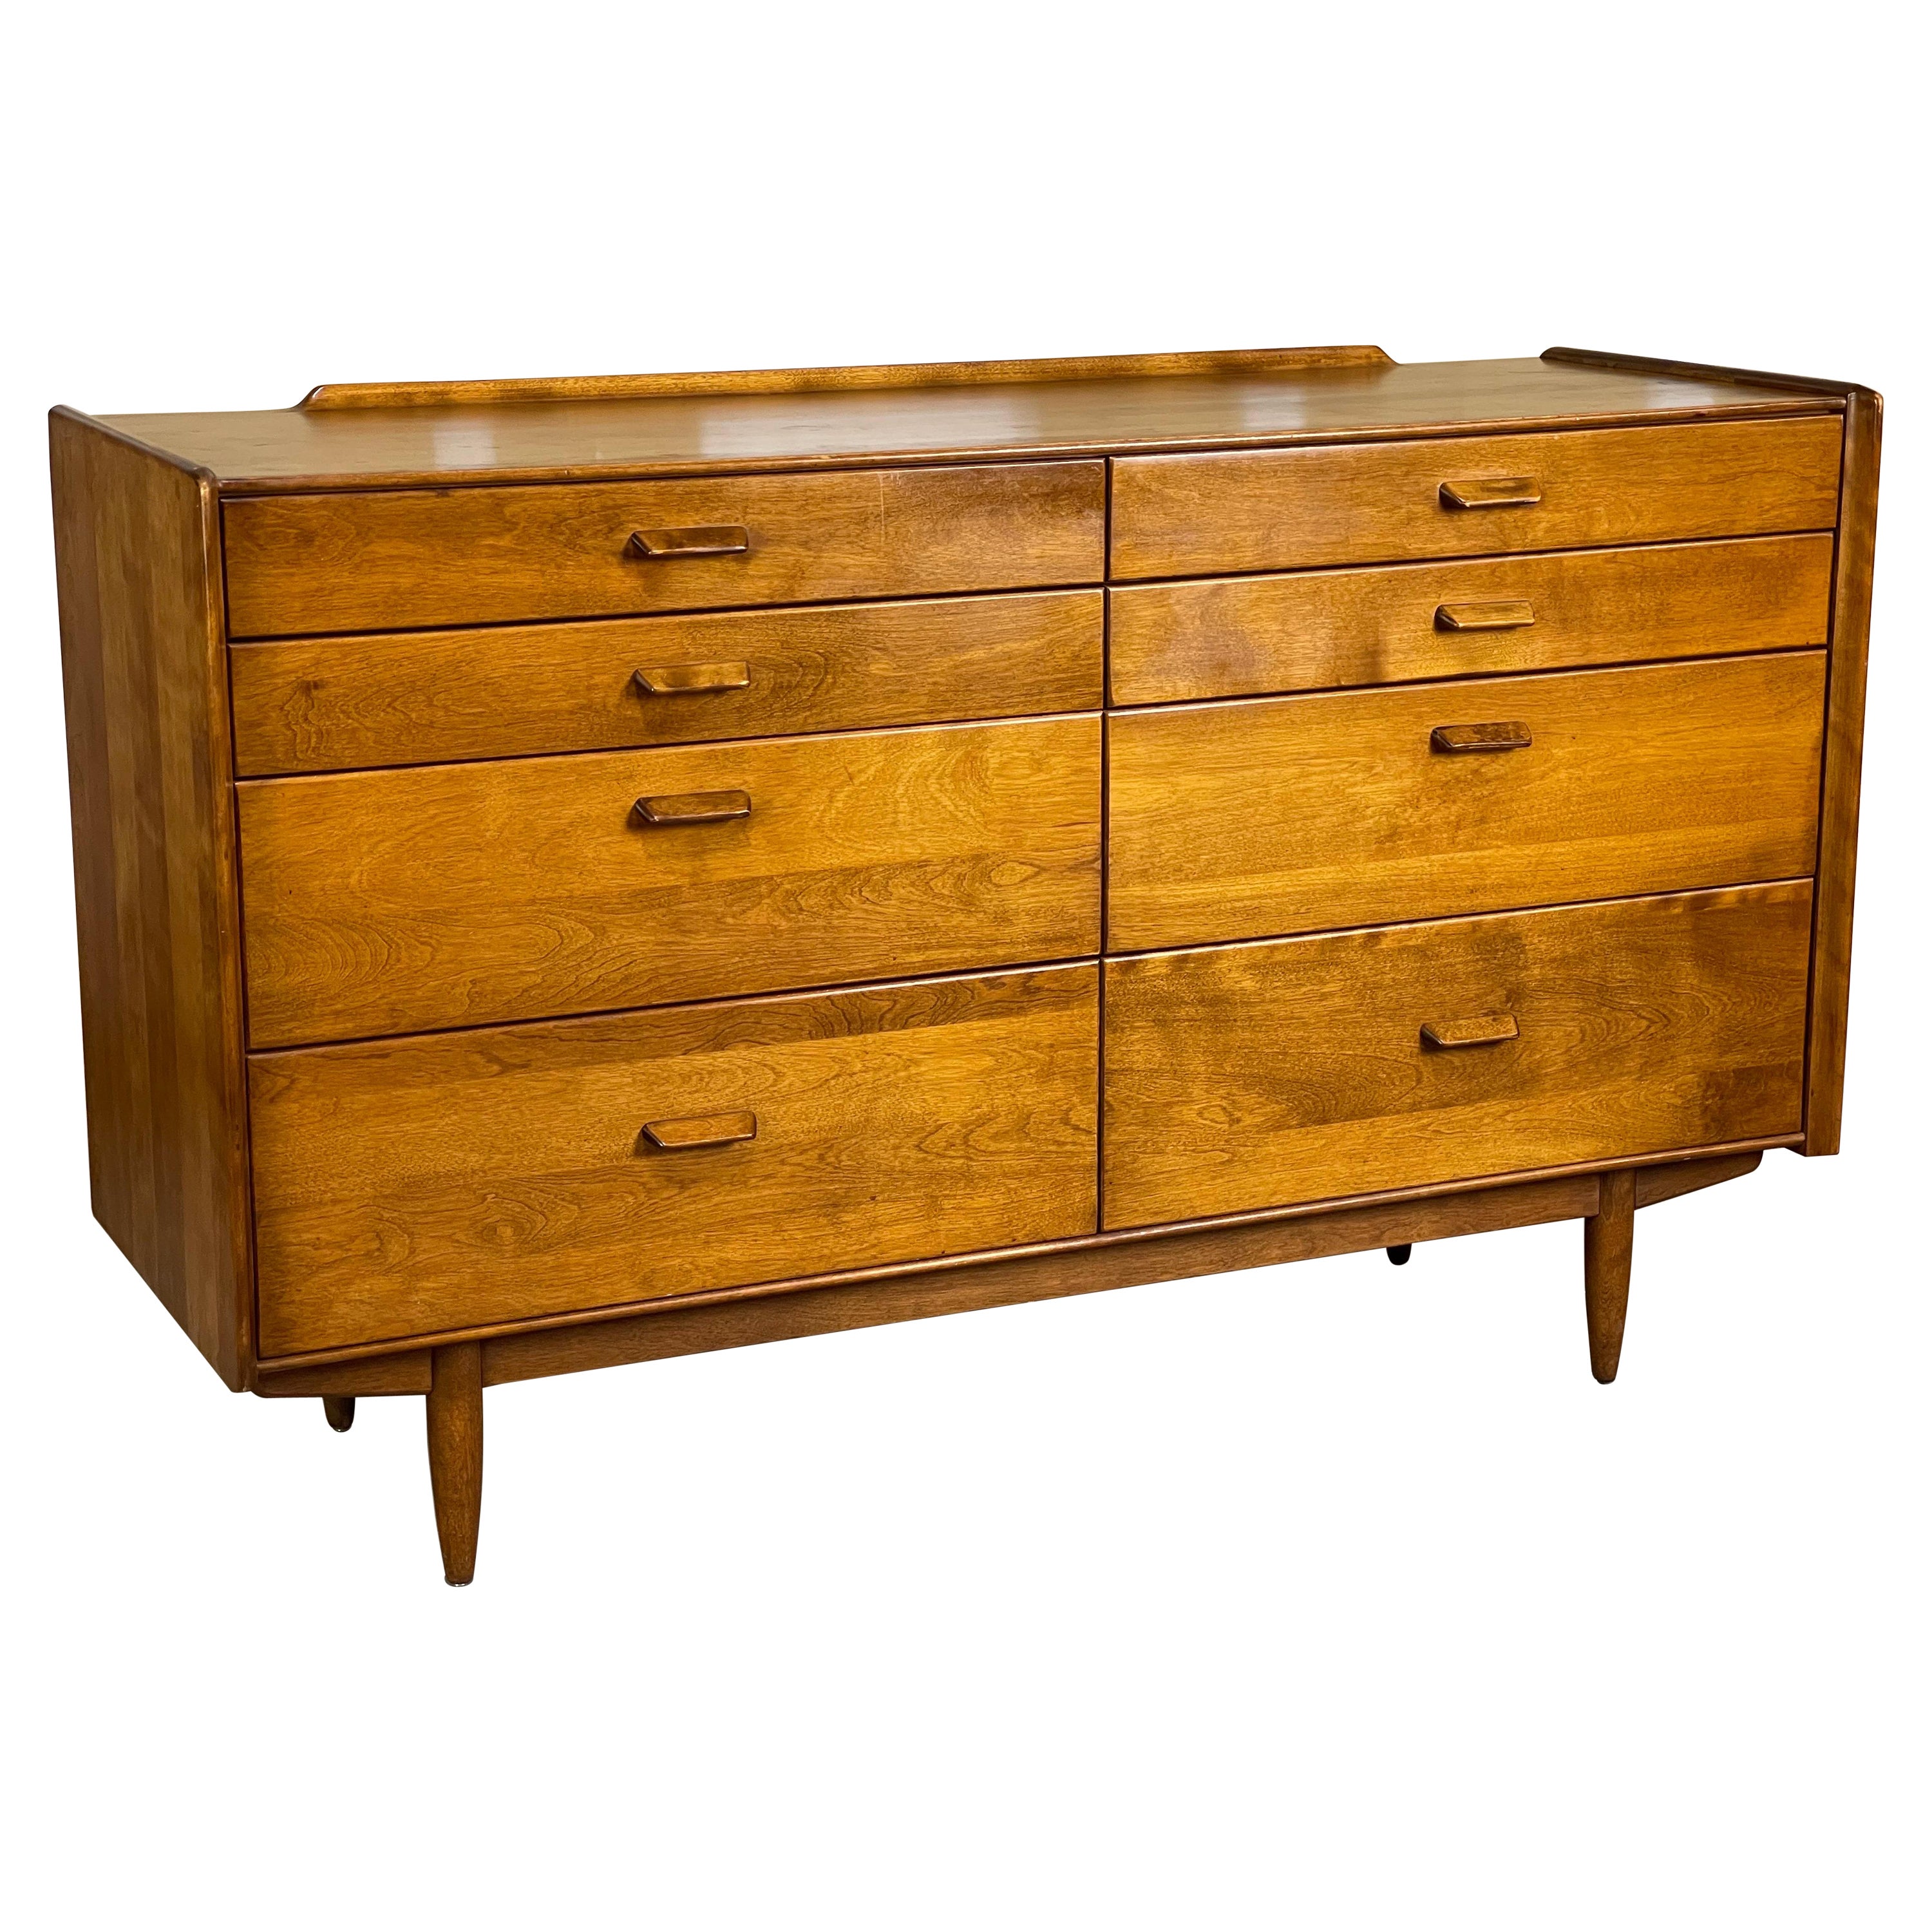 Mid-Century Modern Dresser in Solid Maple by Leslie Diamond for Conant Ball